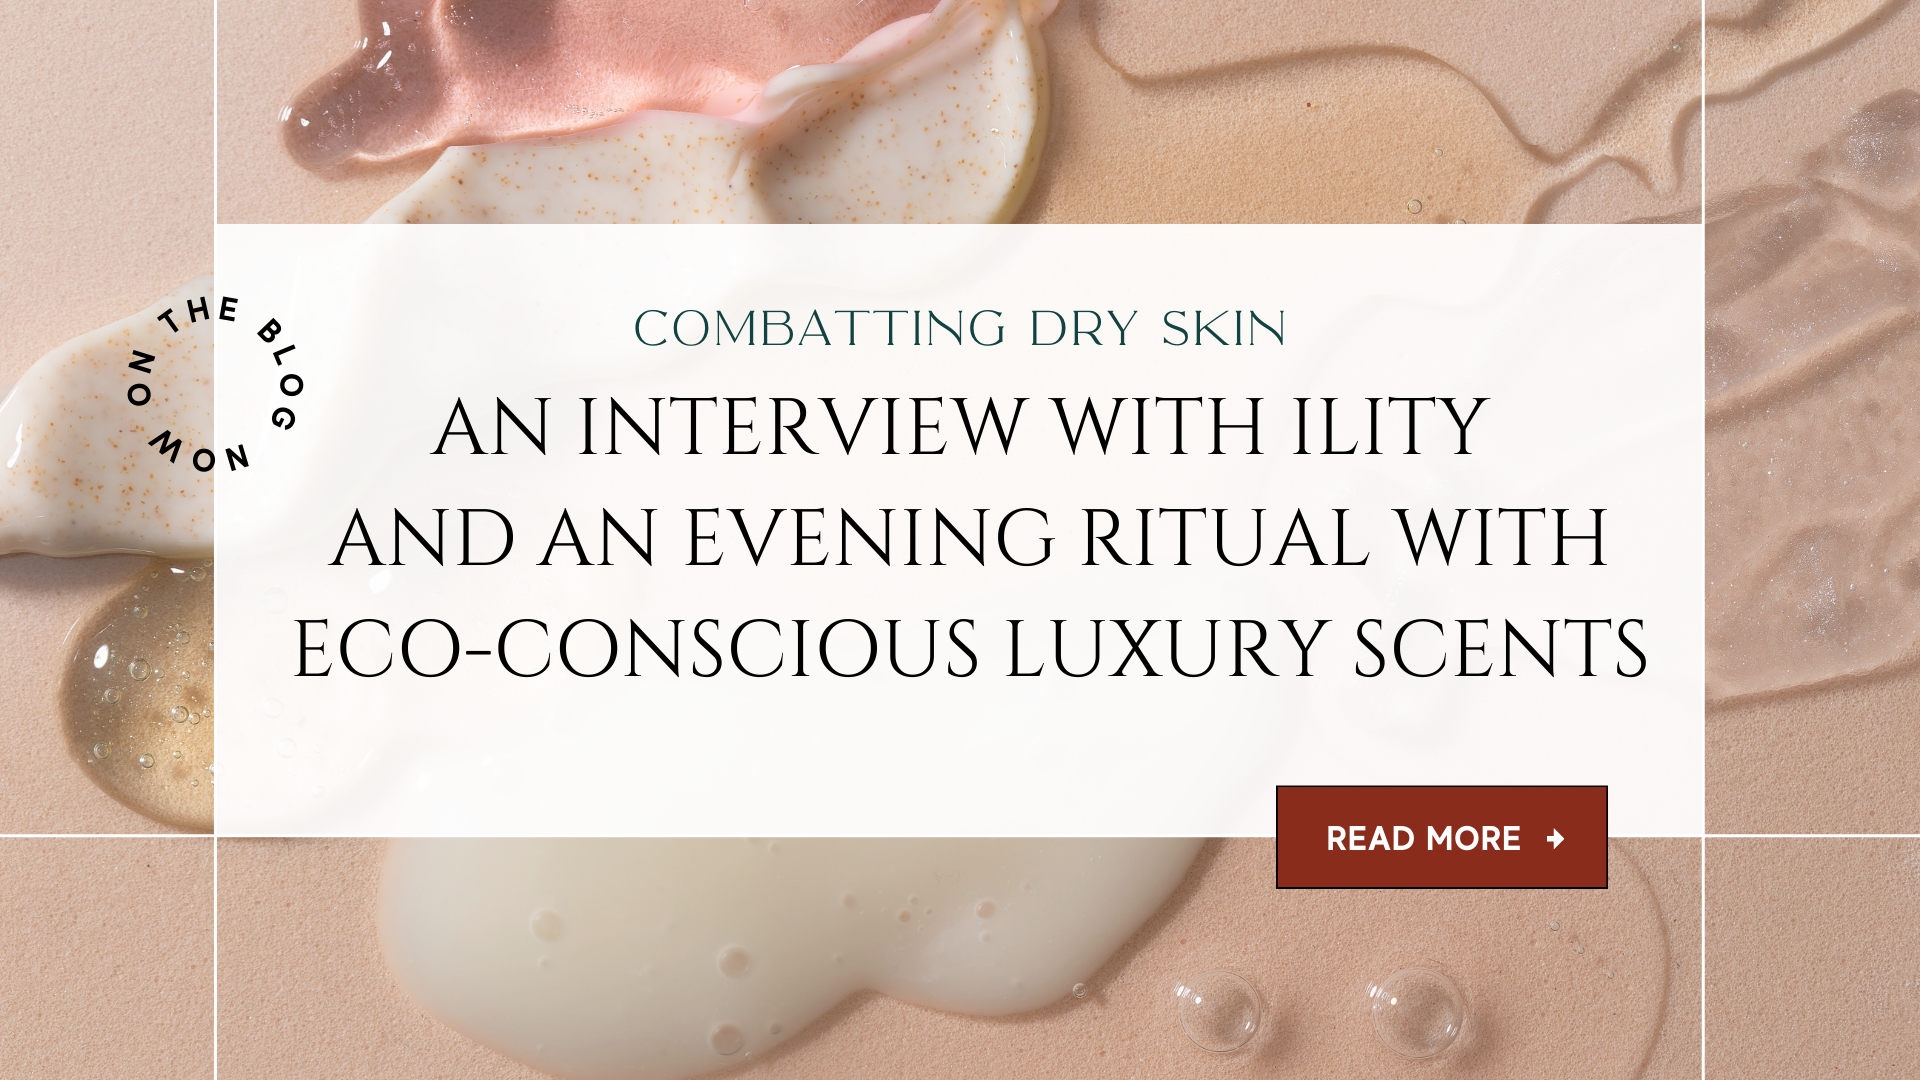 Blog Post Image With Description Reading - An Interview With ility And An Evening Ritual With Eco-Conscious Luxury Scents